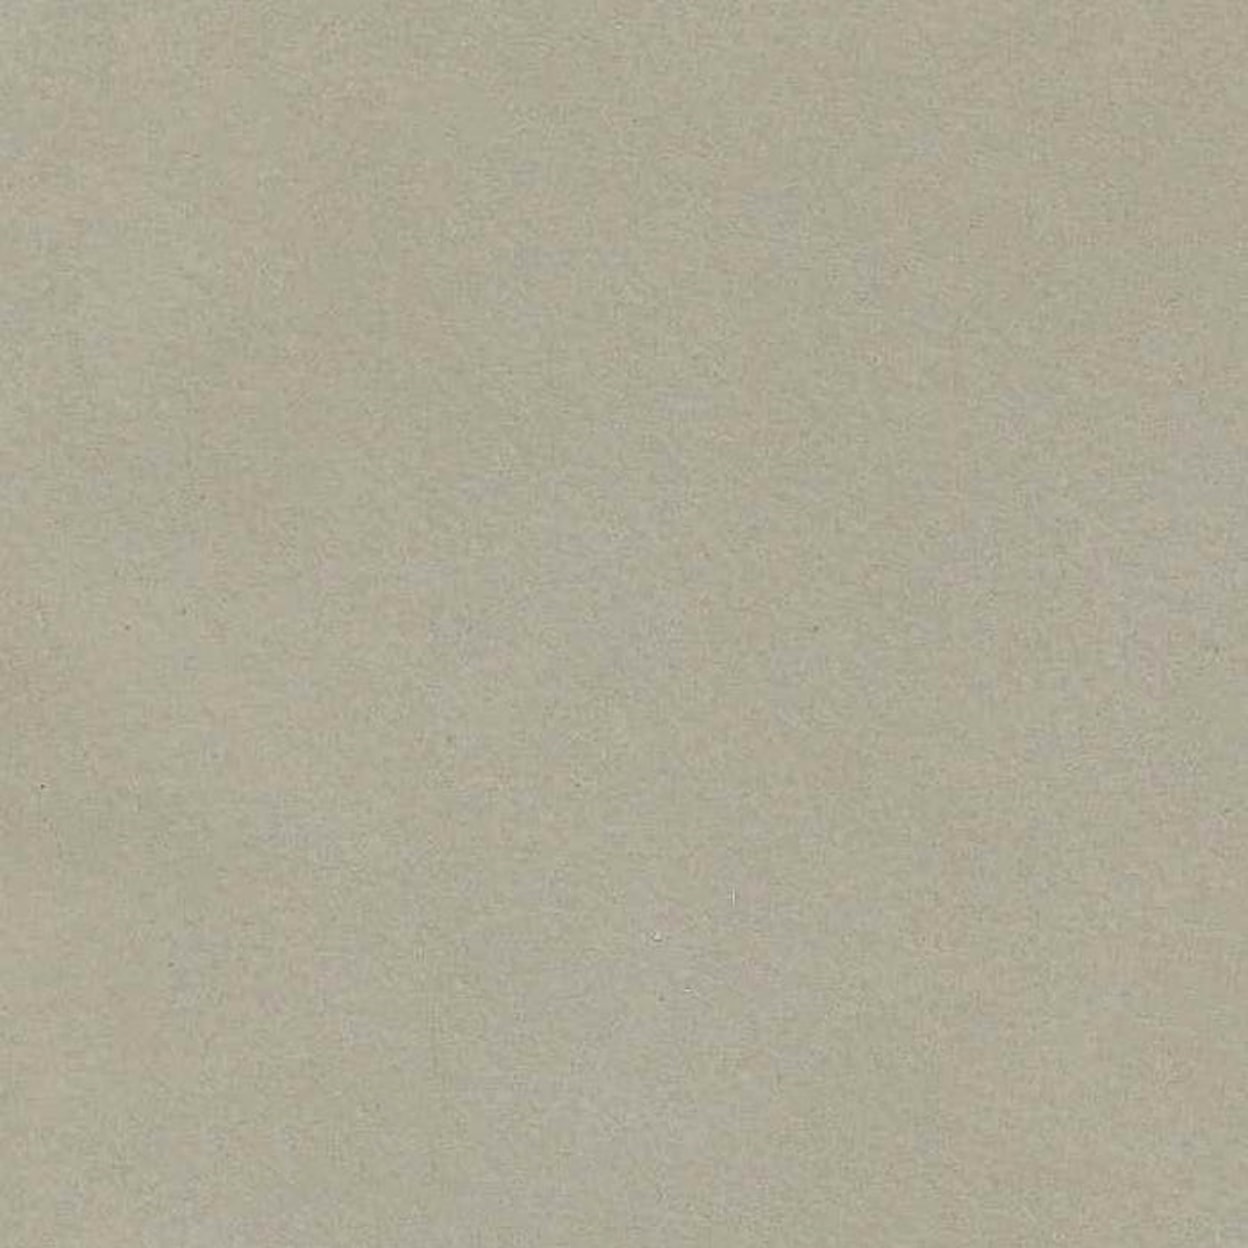 Bruton Taupe 1033